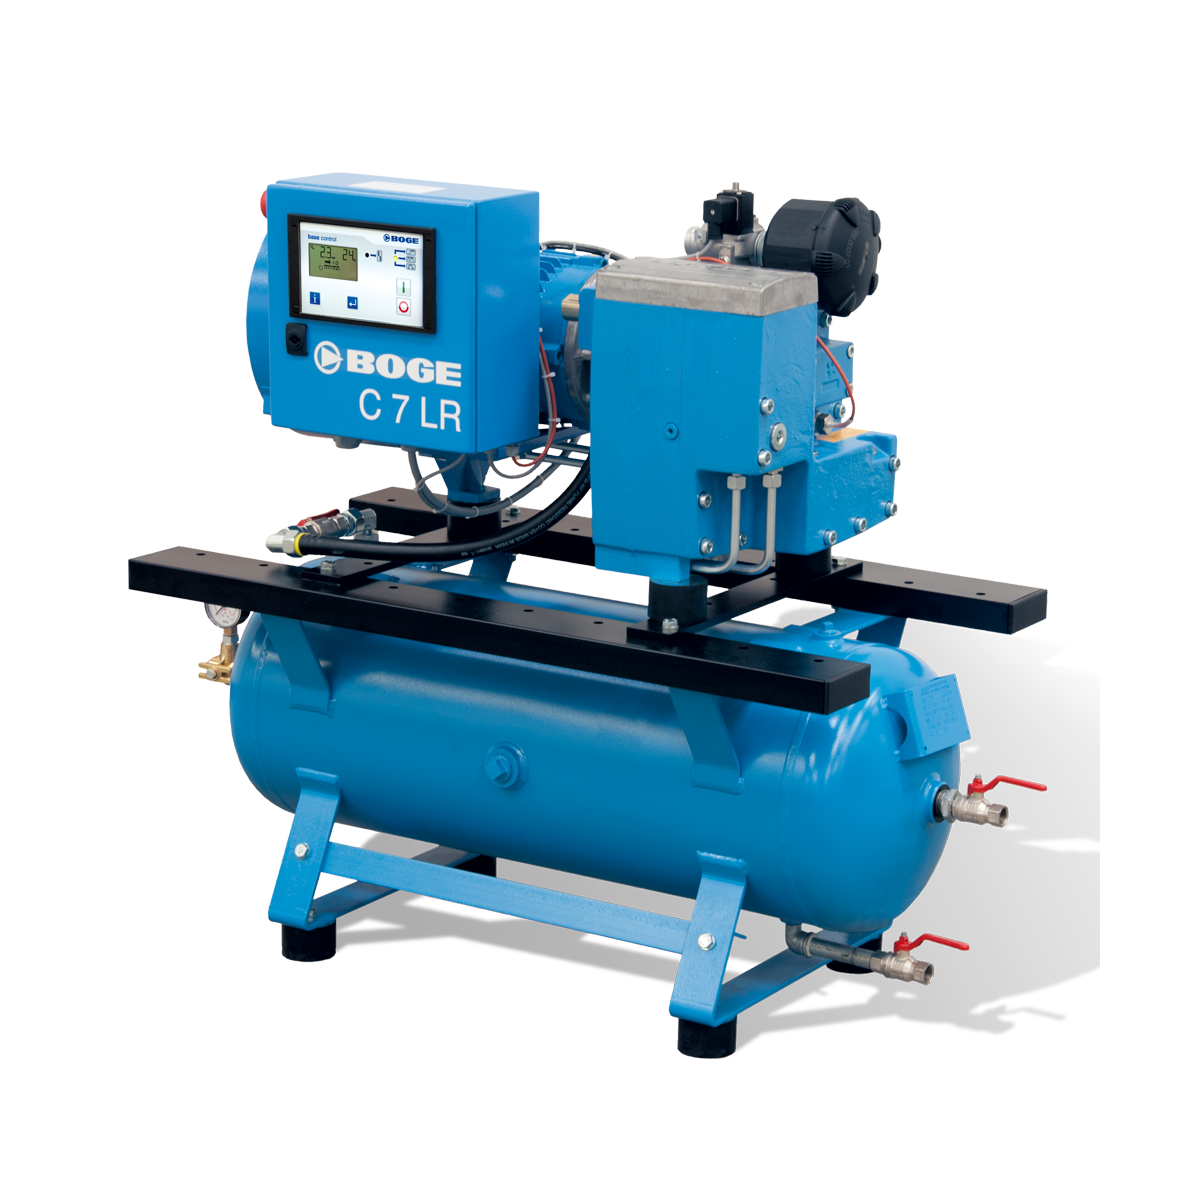 Screw Compressor C...LR series up to 7.5 hp fixed speed